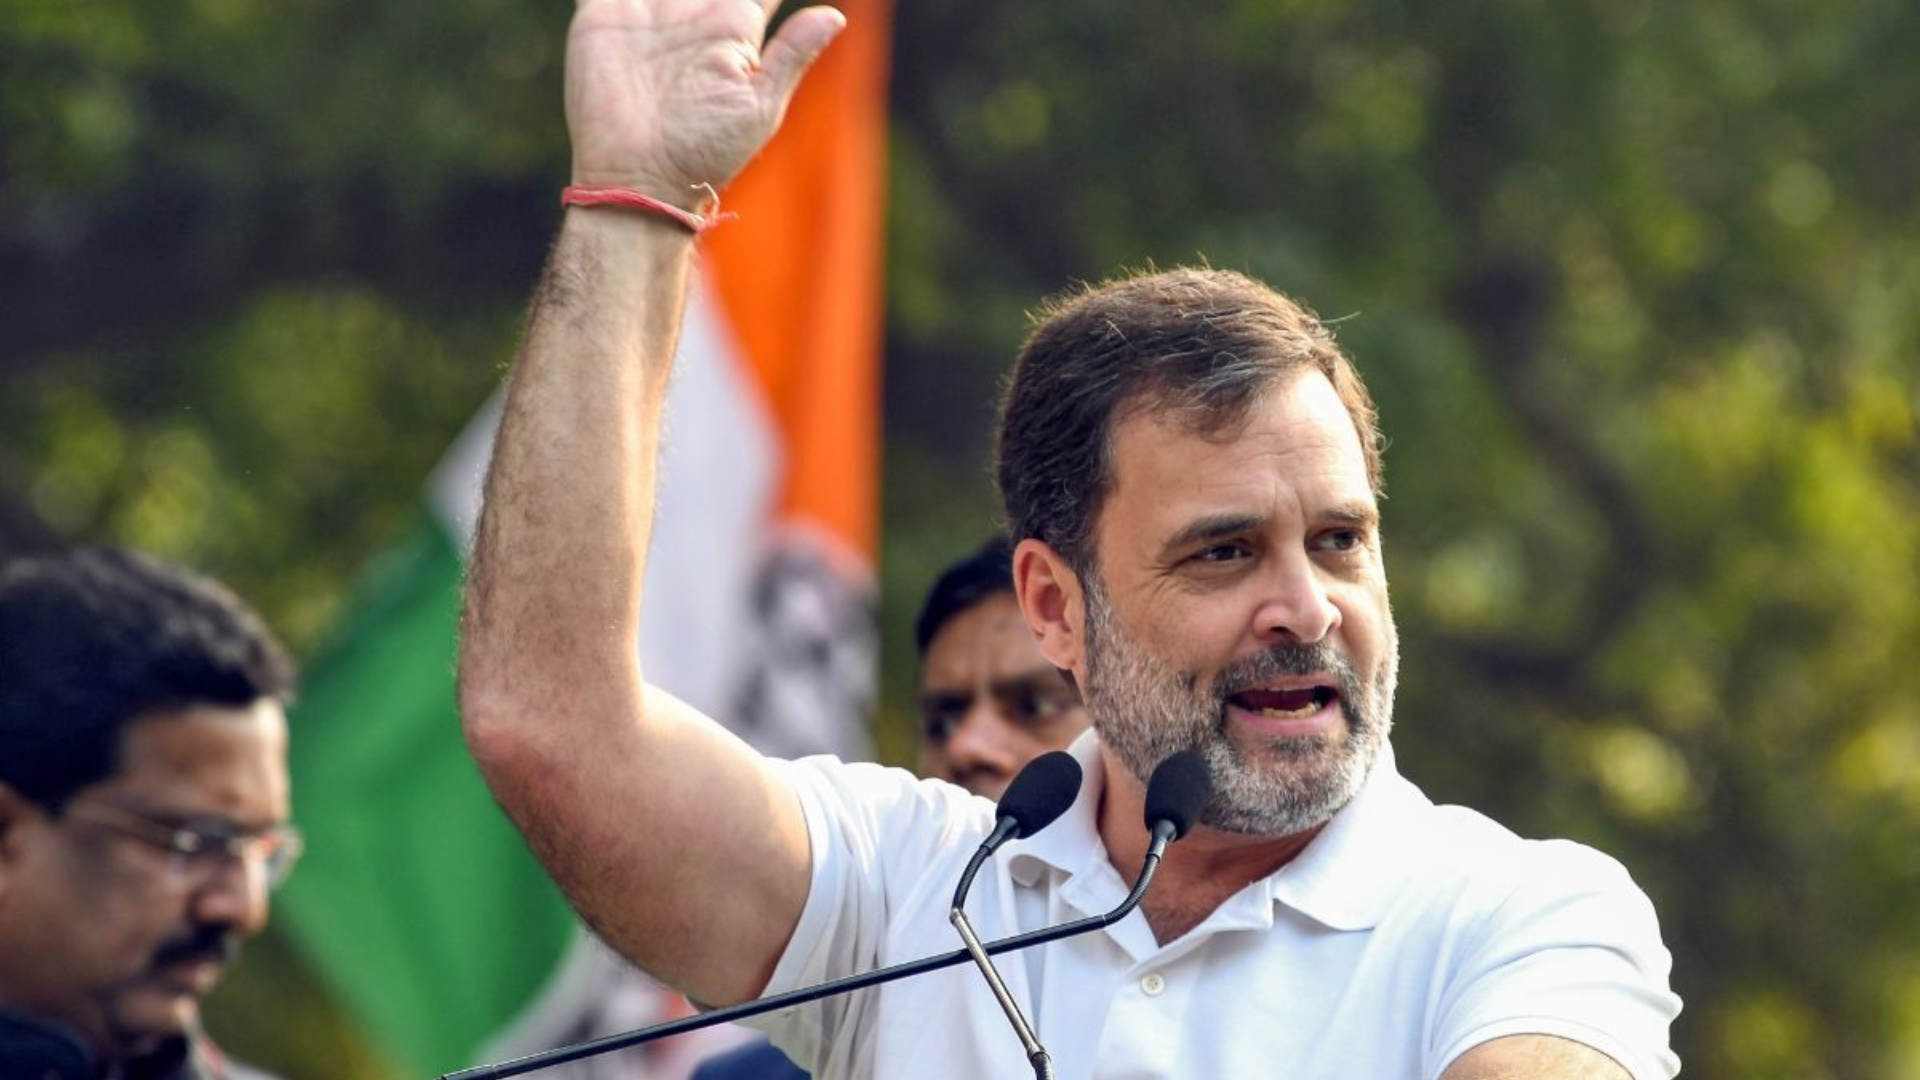 Rahul Gandhi Granted Bail, After for 30-45 minutes of Custody